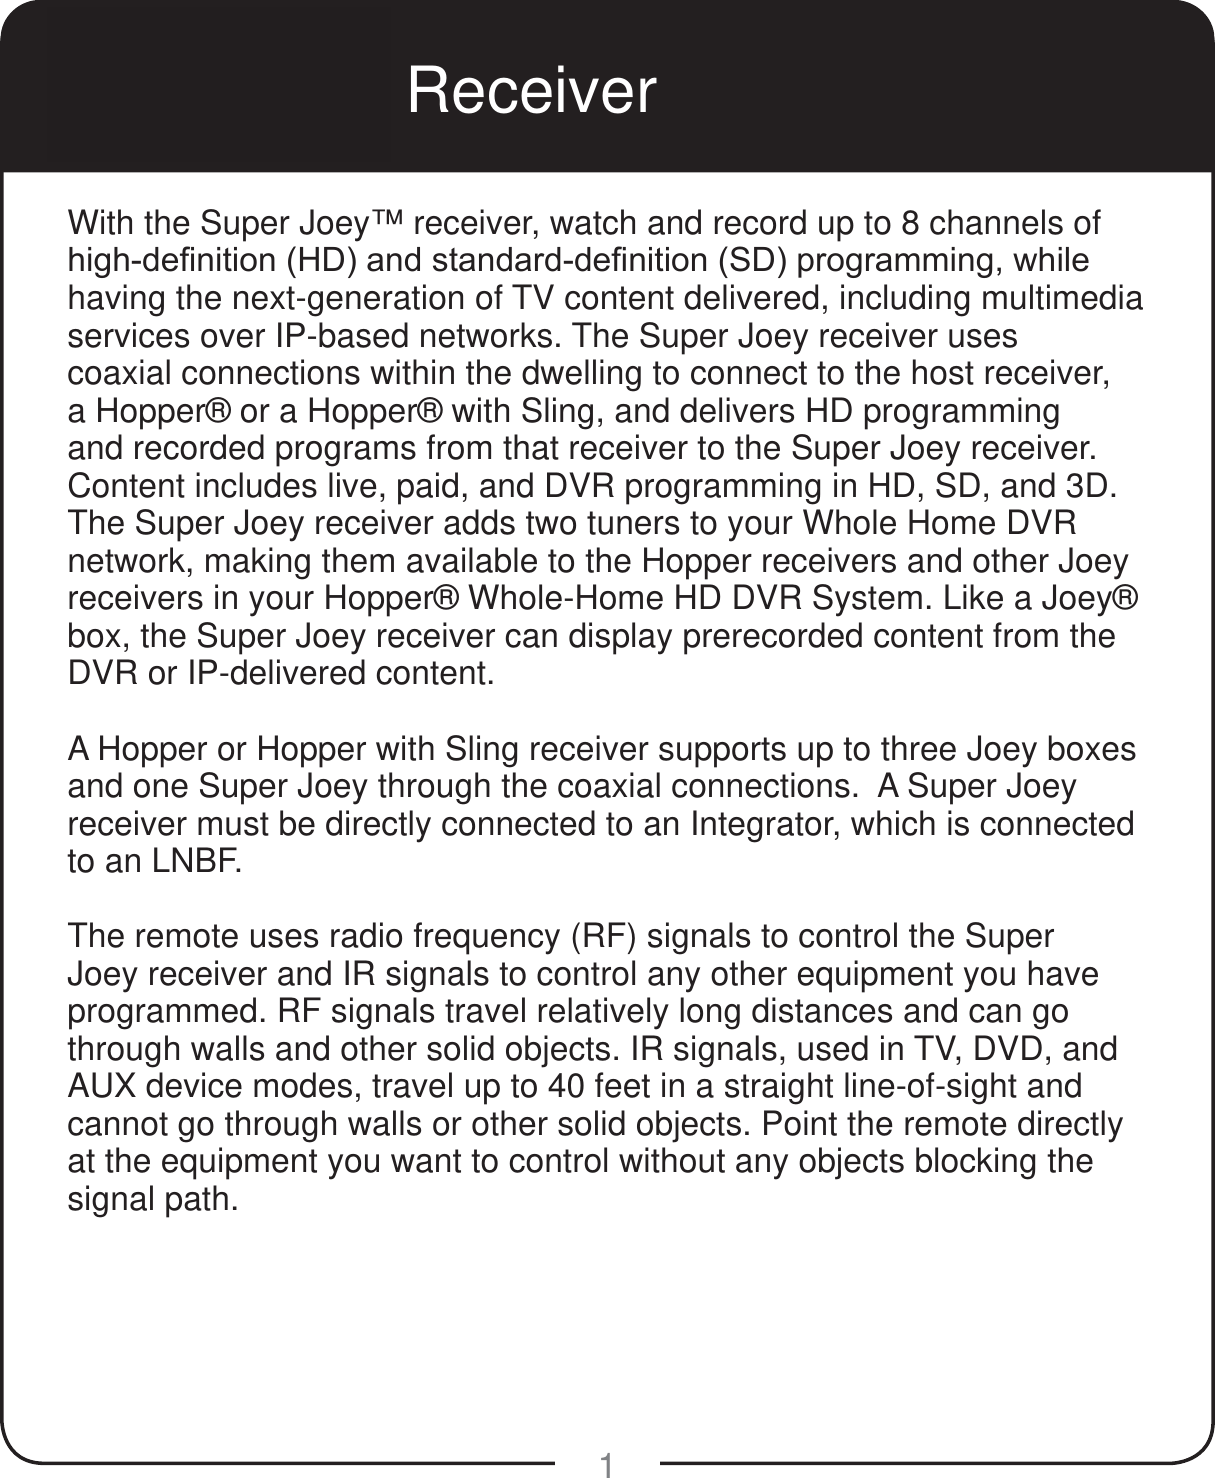 1Super Joey Receiver With the Super Joey™ receiver, watch and record up to 8 channels of KLJKGH¿QLWLRQ+&apos;DQGVWDQGDUGGH¿QLWLRQ6&apos;SURJUDPPLQJZKLOHhaving the next-generation of TV content delivered, including multimedia services over IP-based networks. The Super Joey receiver uses coaxial connections within the dwelling to connect to the host receiver, a Hopper® or a Hopper® with Sling, and delivers HD programming and recorded programs from that receiver to the Super Joey receiver. Content includes live, paid, and DVR programming in HD, SD, and 3D. The Super Joey receiver adds two tuners to your Whole Home DVR network, making them available to the Hopper receivers and other Joey receivers in your Hopper® Whole-Home HD DVR System. Like a Joey® box, the Super Joey receiver can display prerecorded content from the DVR or IP-delivered content.A Hopper or Hopper with Sling receiver supports up to three Joey boxes and one Super Joey through the coaxial connections.  A Super Joey receiver must be directly connected to an Integrator, which is connected to an LNBF.The remote uses radio frequency (RF) signals to control the Super Joey receiver and IR signals to control any other equipment you have programmed. RF signals travel relatively long distances and can go through walls and other solid objects. IR signals, used in TV, DVD, and AUX device modes, travel up to 40 feet in a straight line-of-sight and cannot go through walls or other solid objects. Point the remote directly at the equipment you want to control without any objects blocking the signal path.